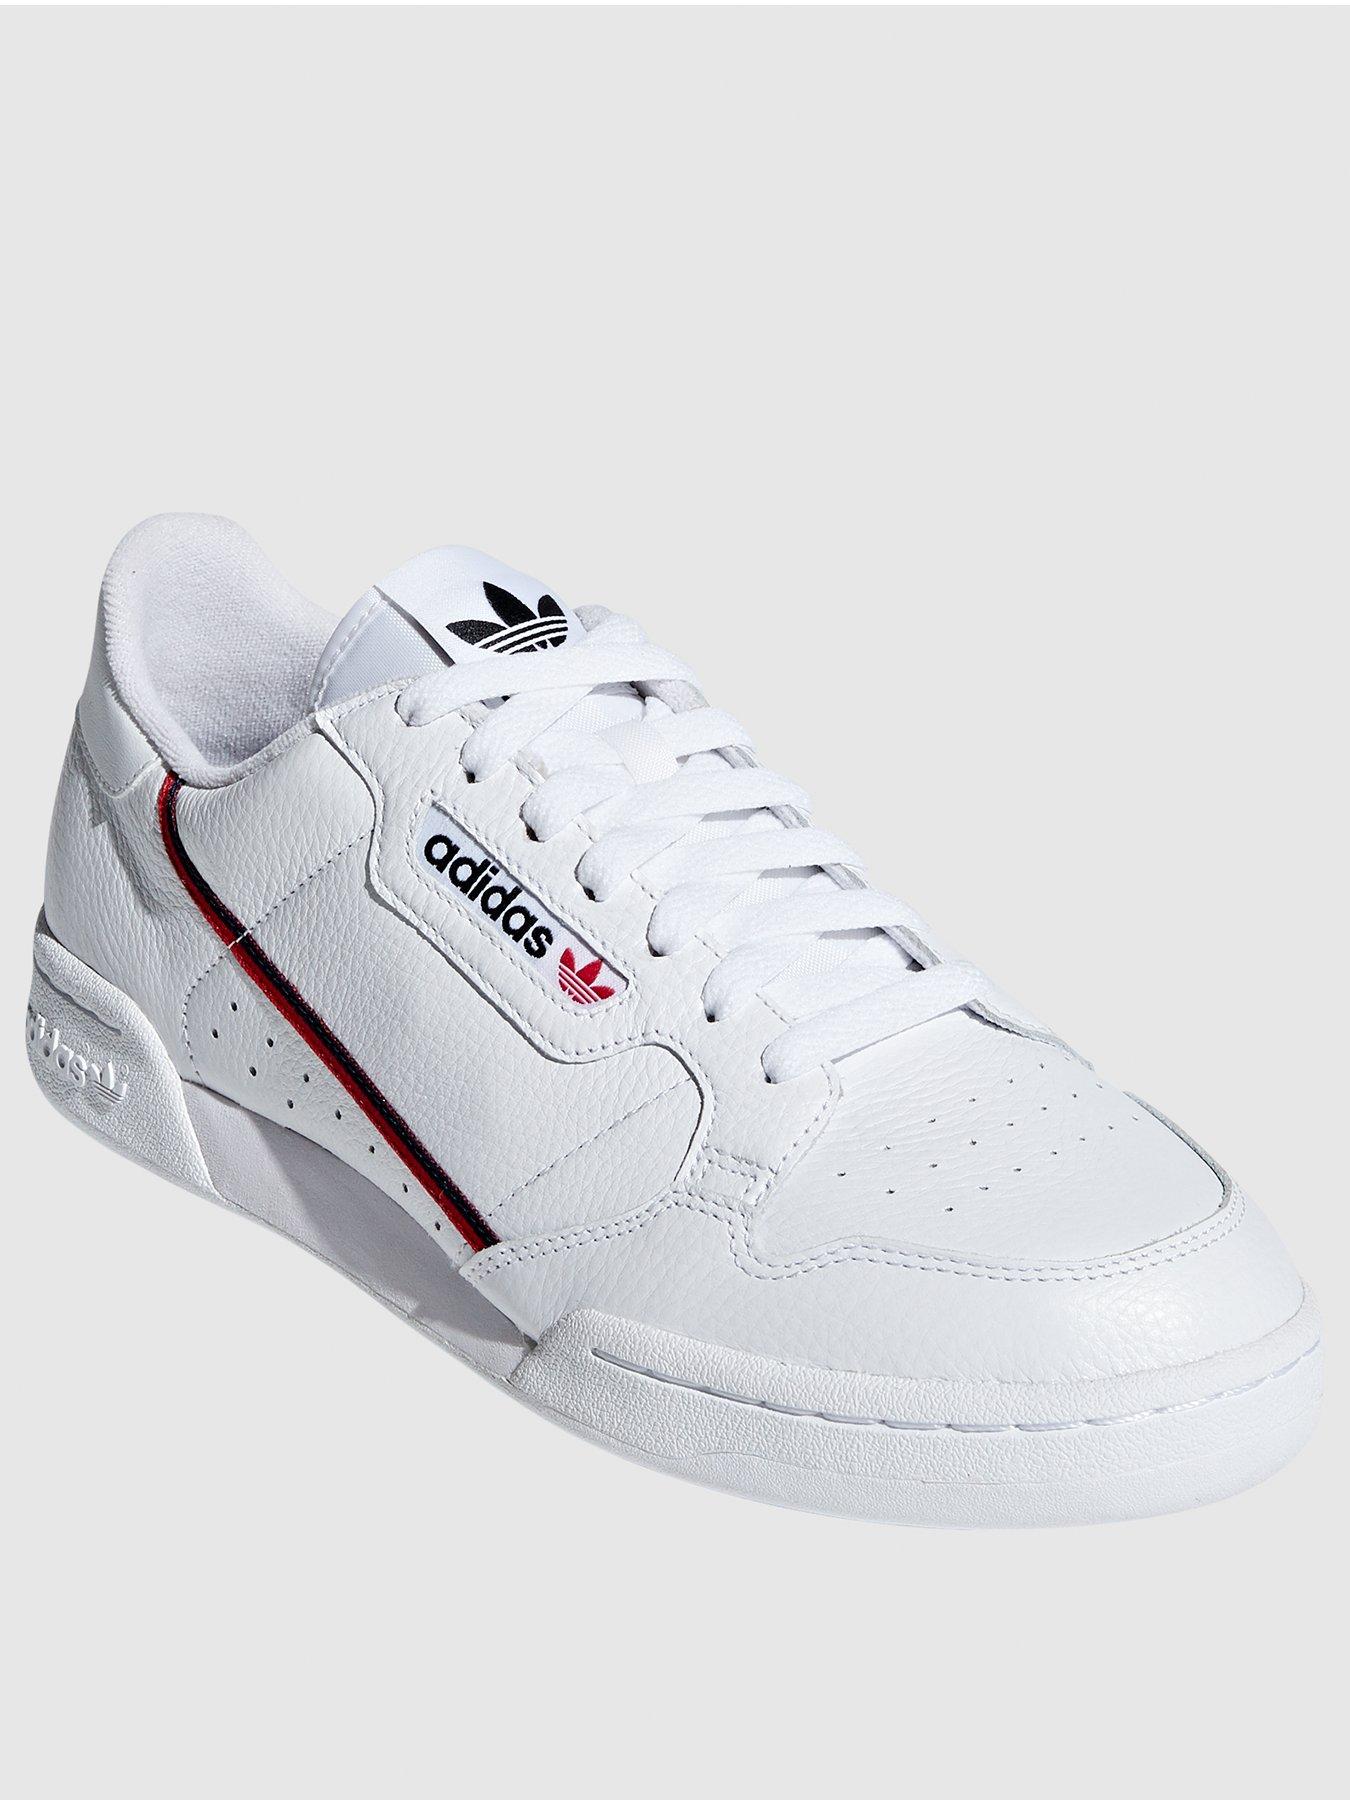 adidas continental 80 white red